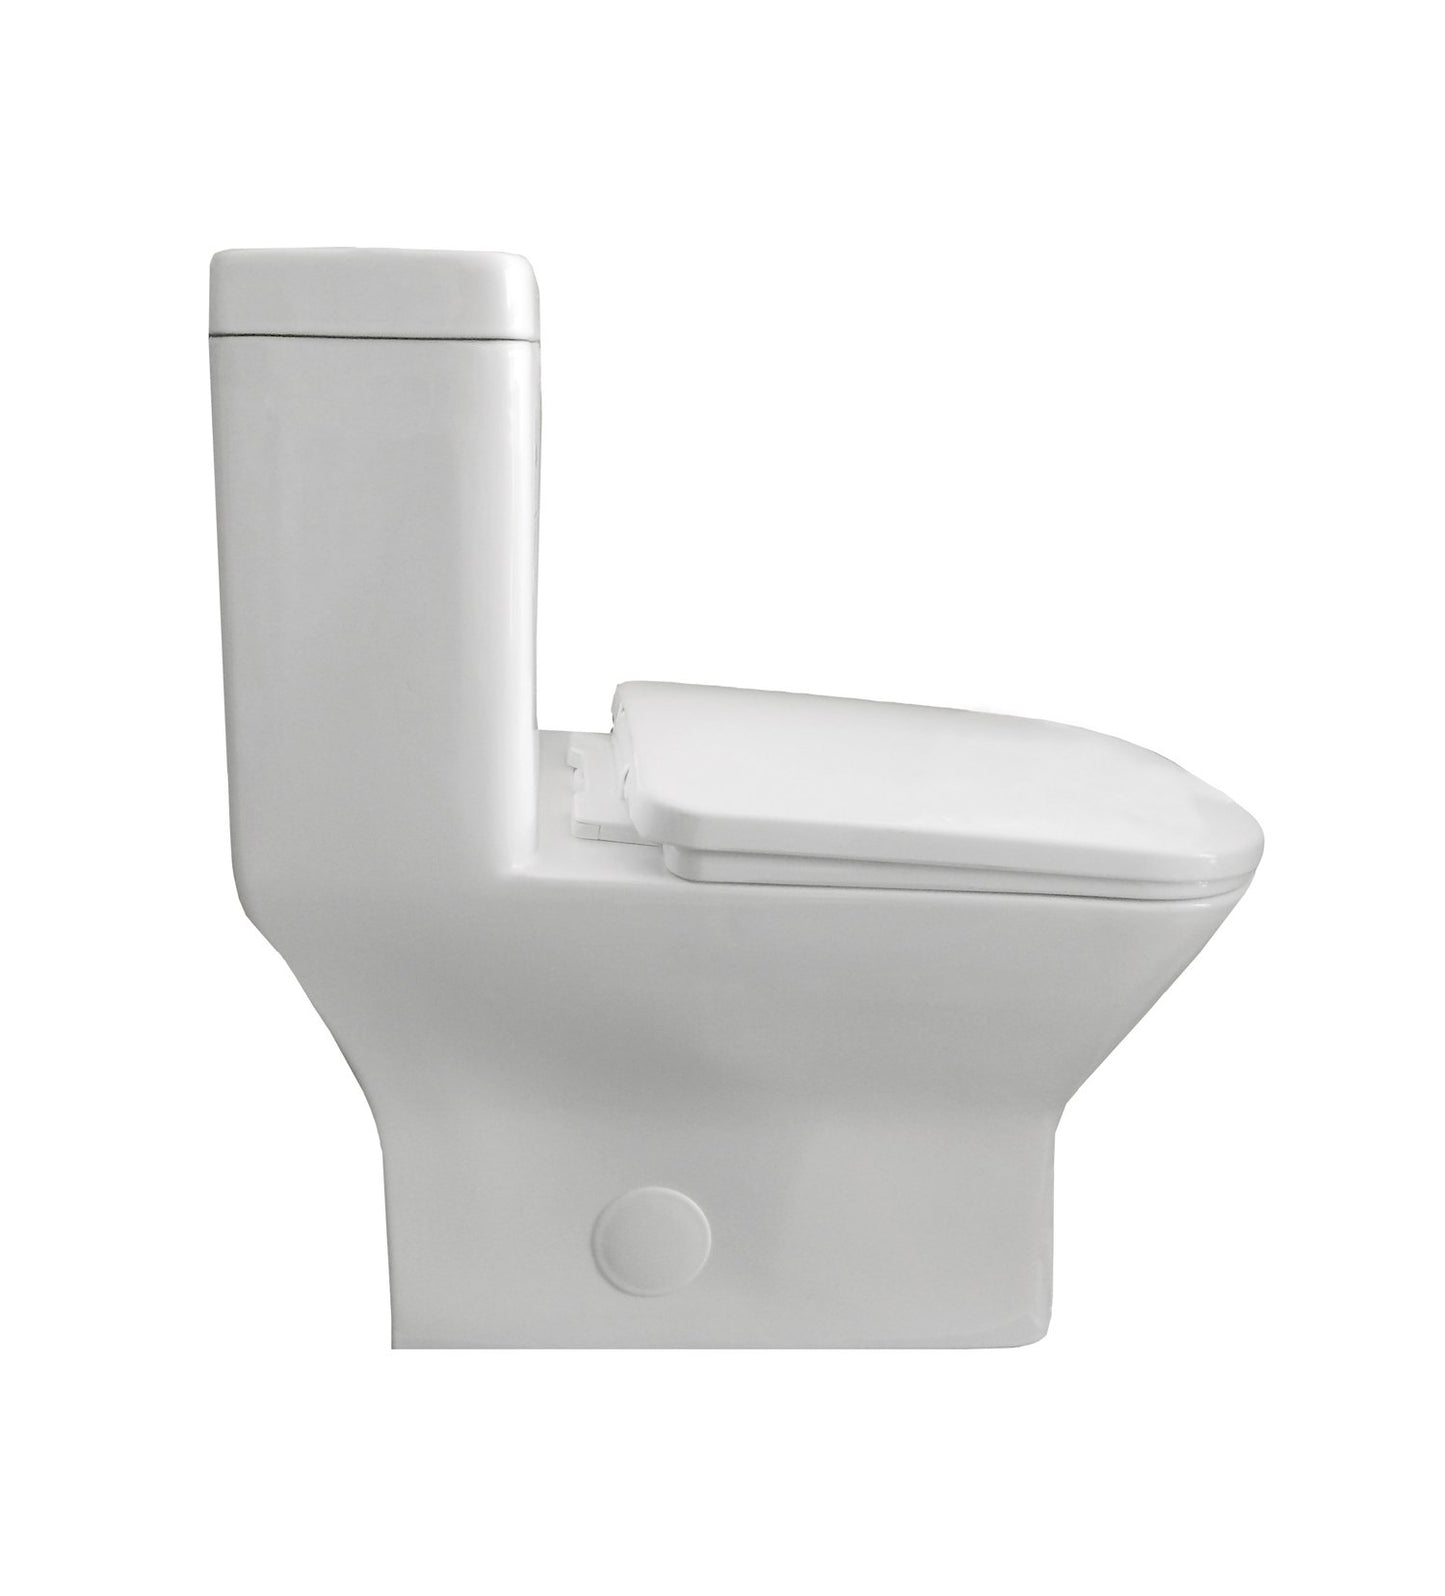 Eviva Storm Elongated Cotton White One Piece Toilet with Soft Closing Seat Cover - Luxe Bathroom Vanities Luxury Bathroom Fixtures Bathroom Furniture